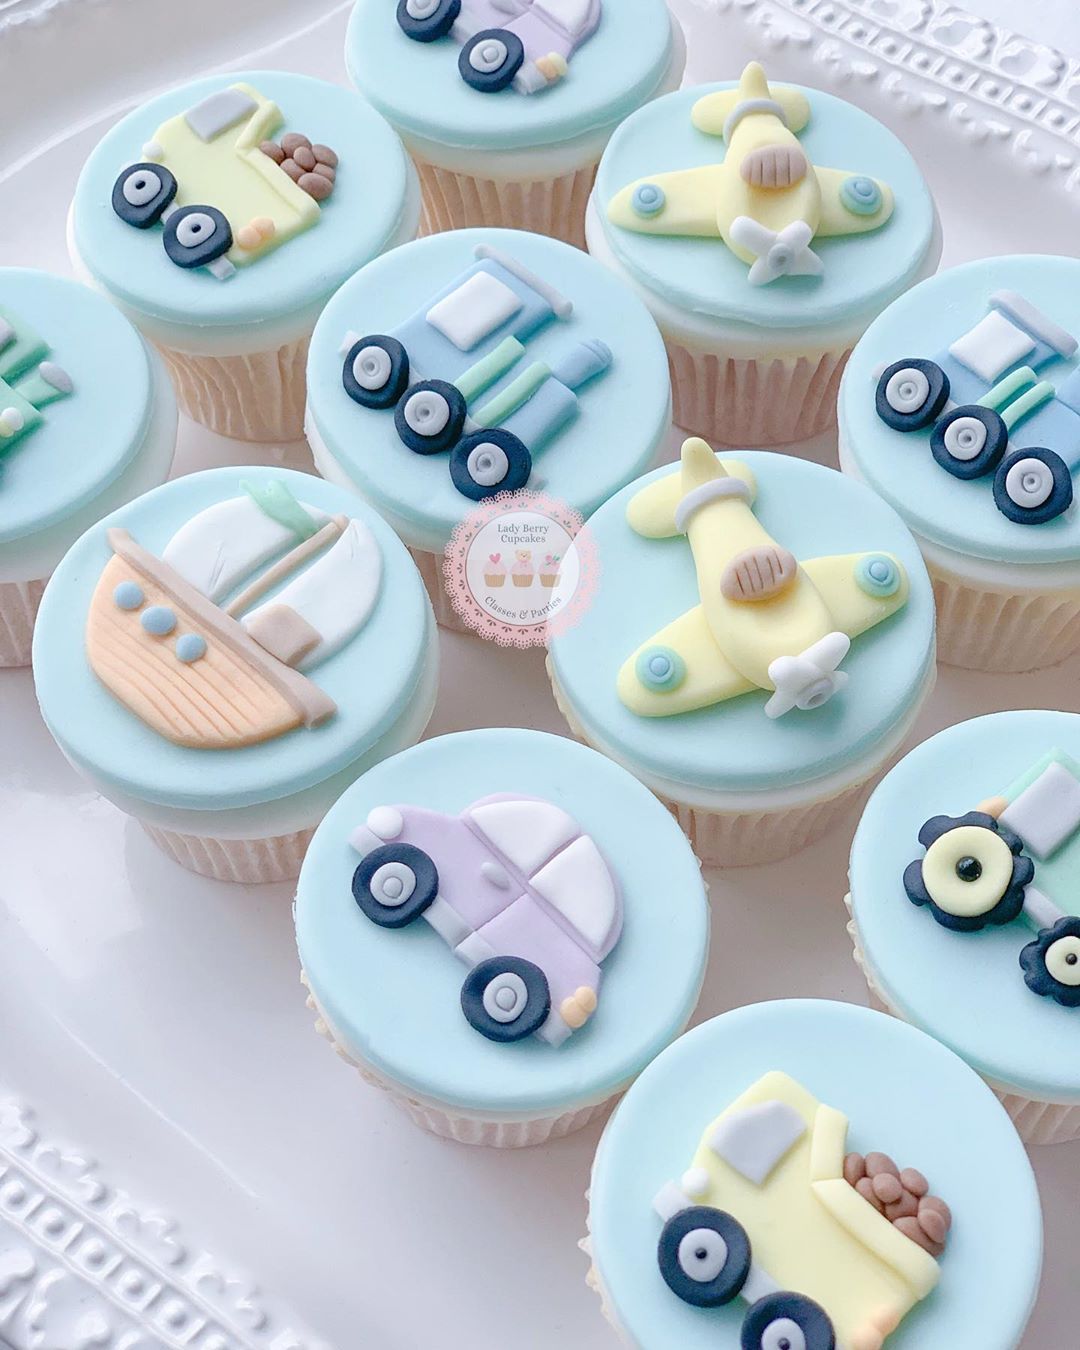 Lady-Berry-Cupcakes. Top 10 Online Cake Decorating Classes of 2022